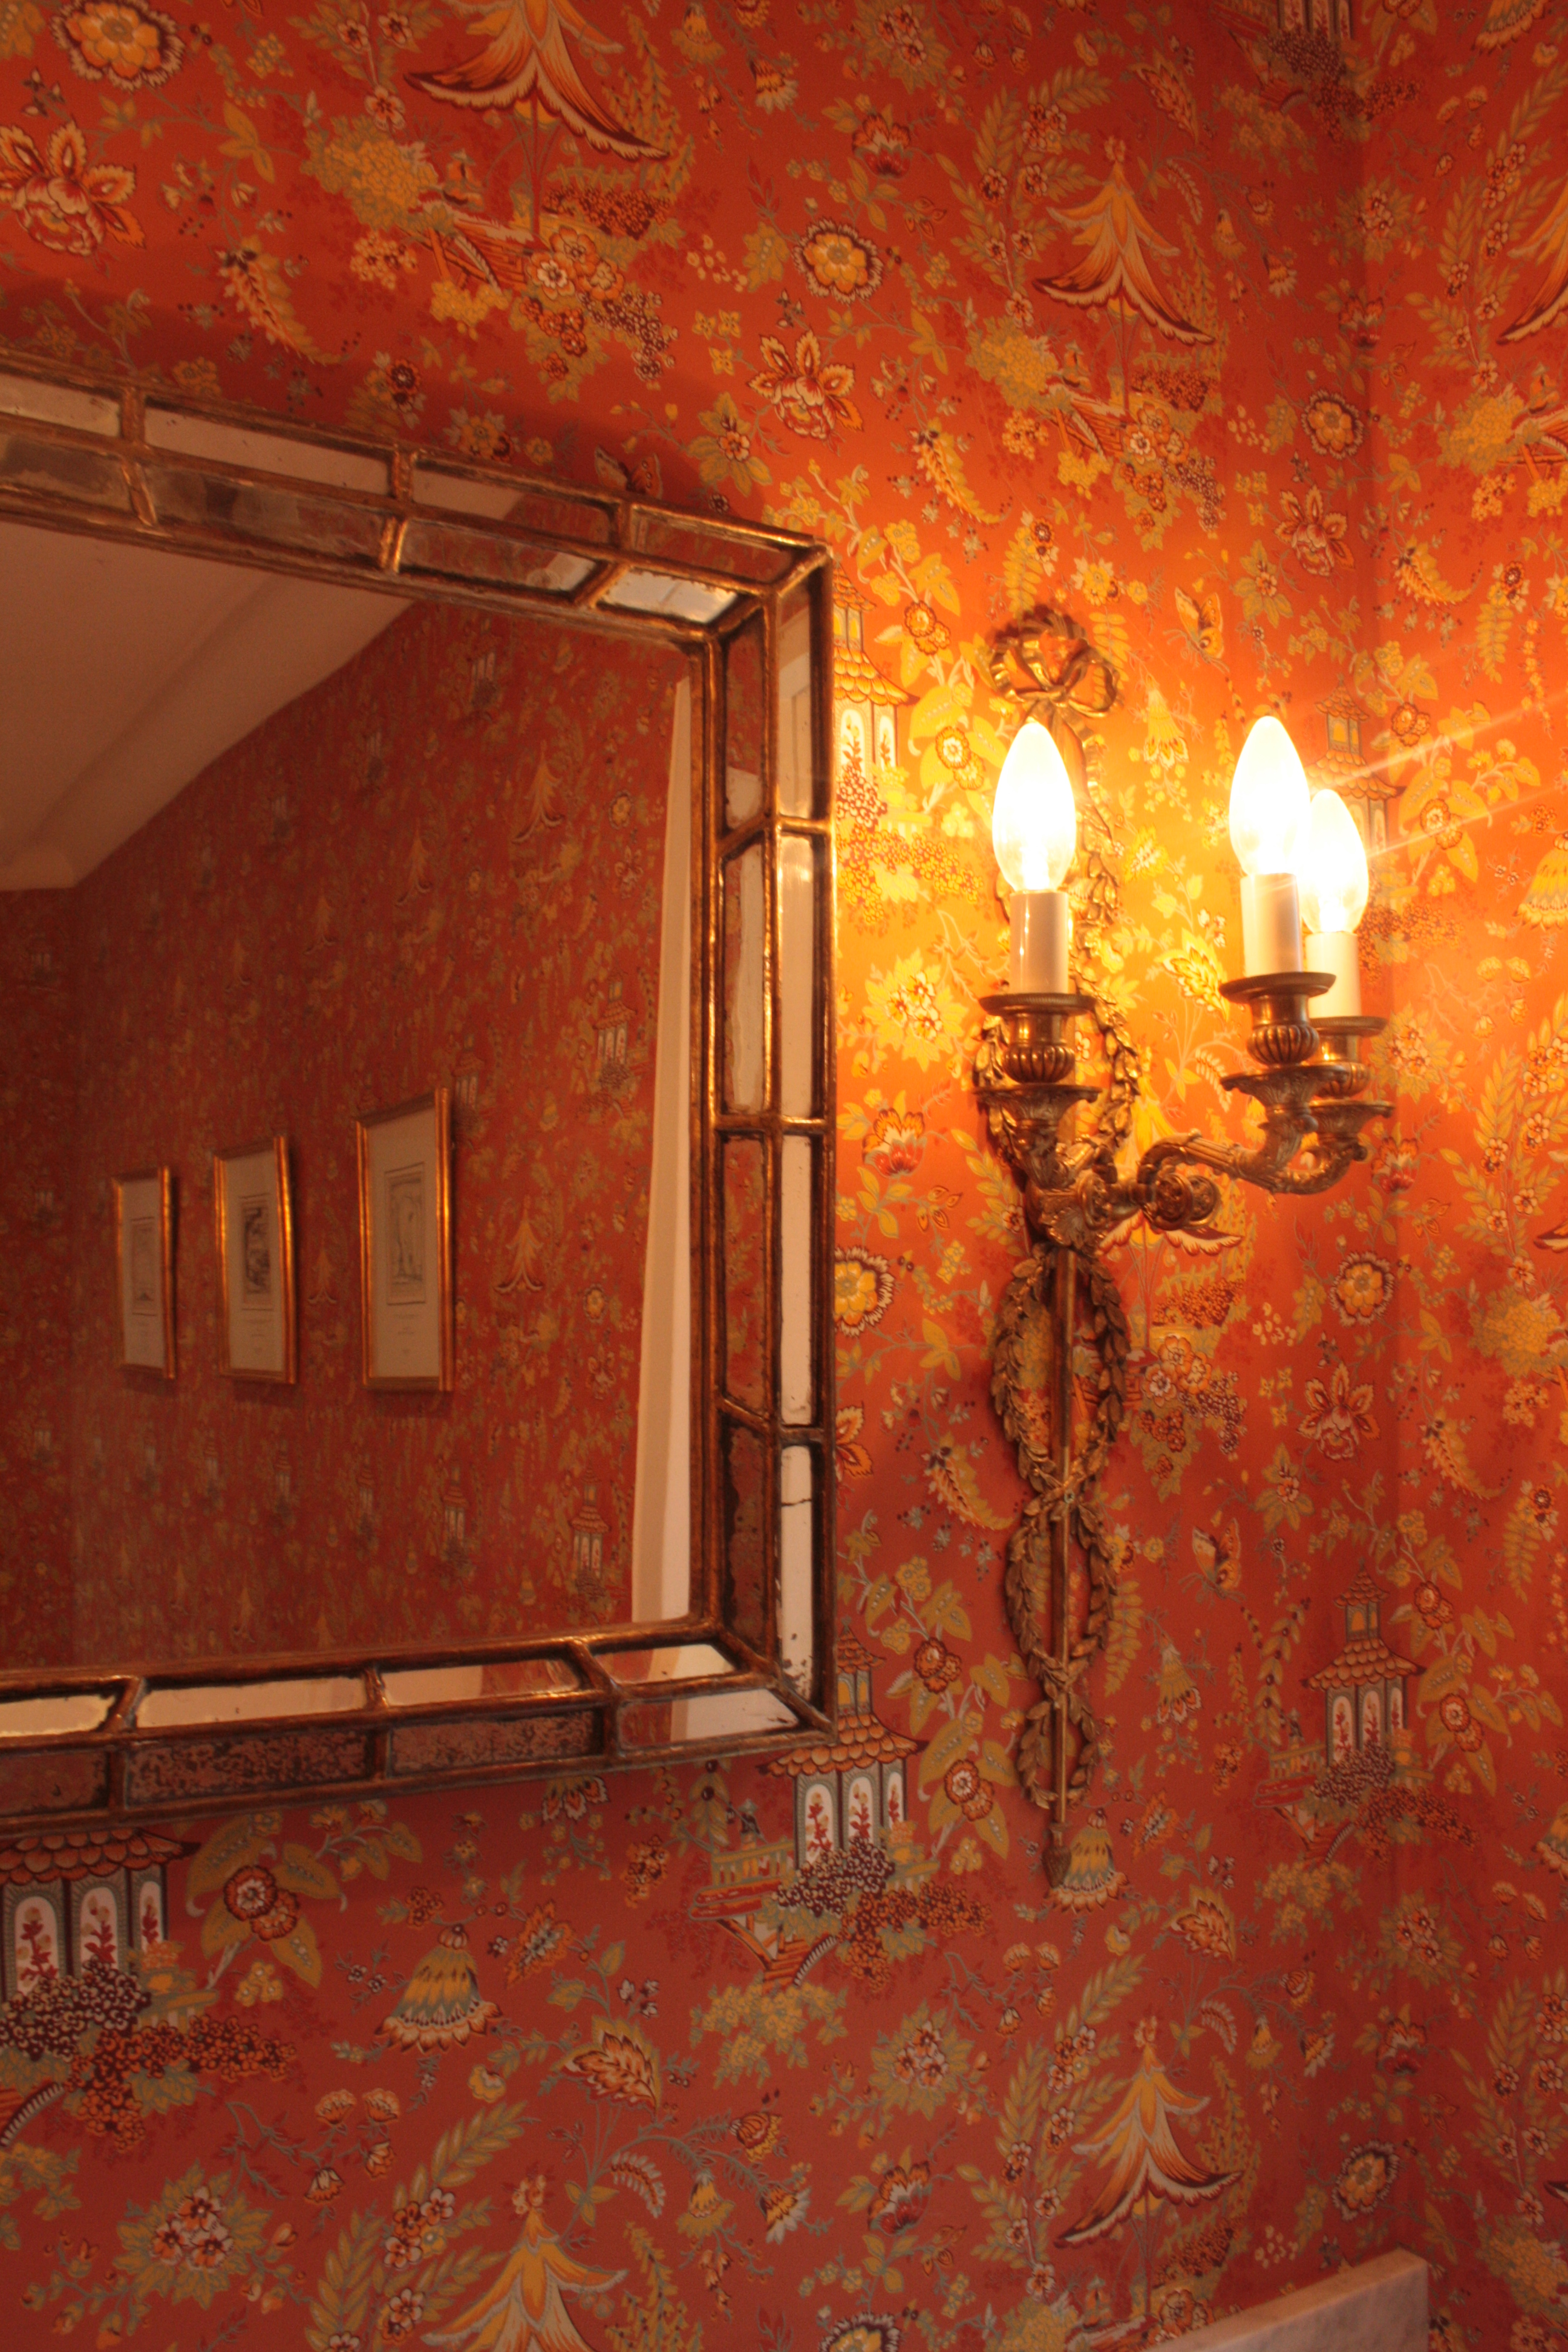 The Cloakroom Chinoiserie wallpaper, antique gilt mirror and wall sconces in detail